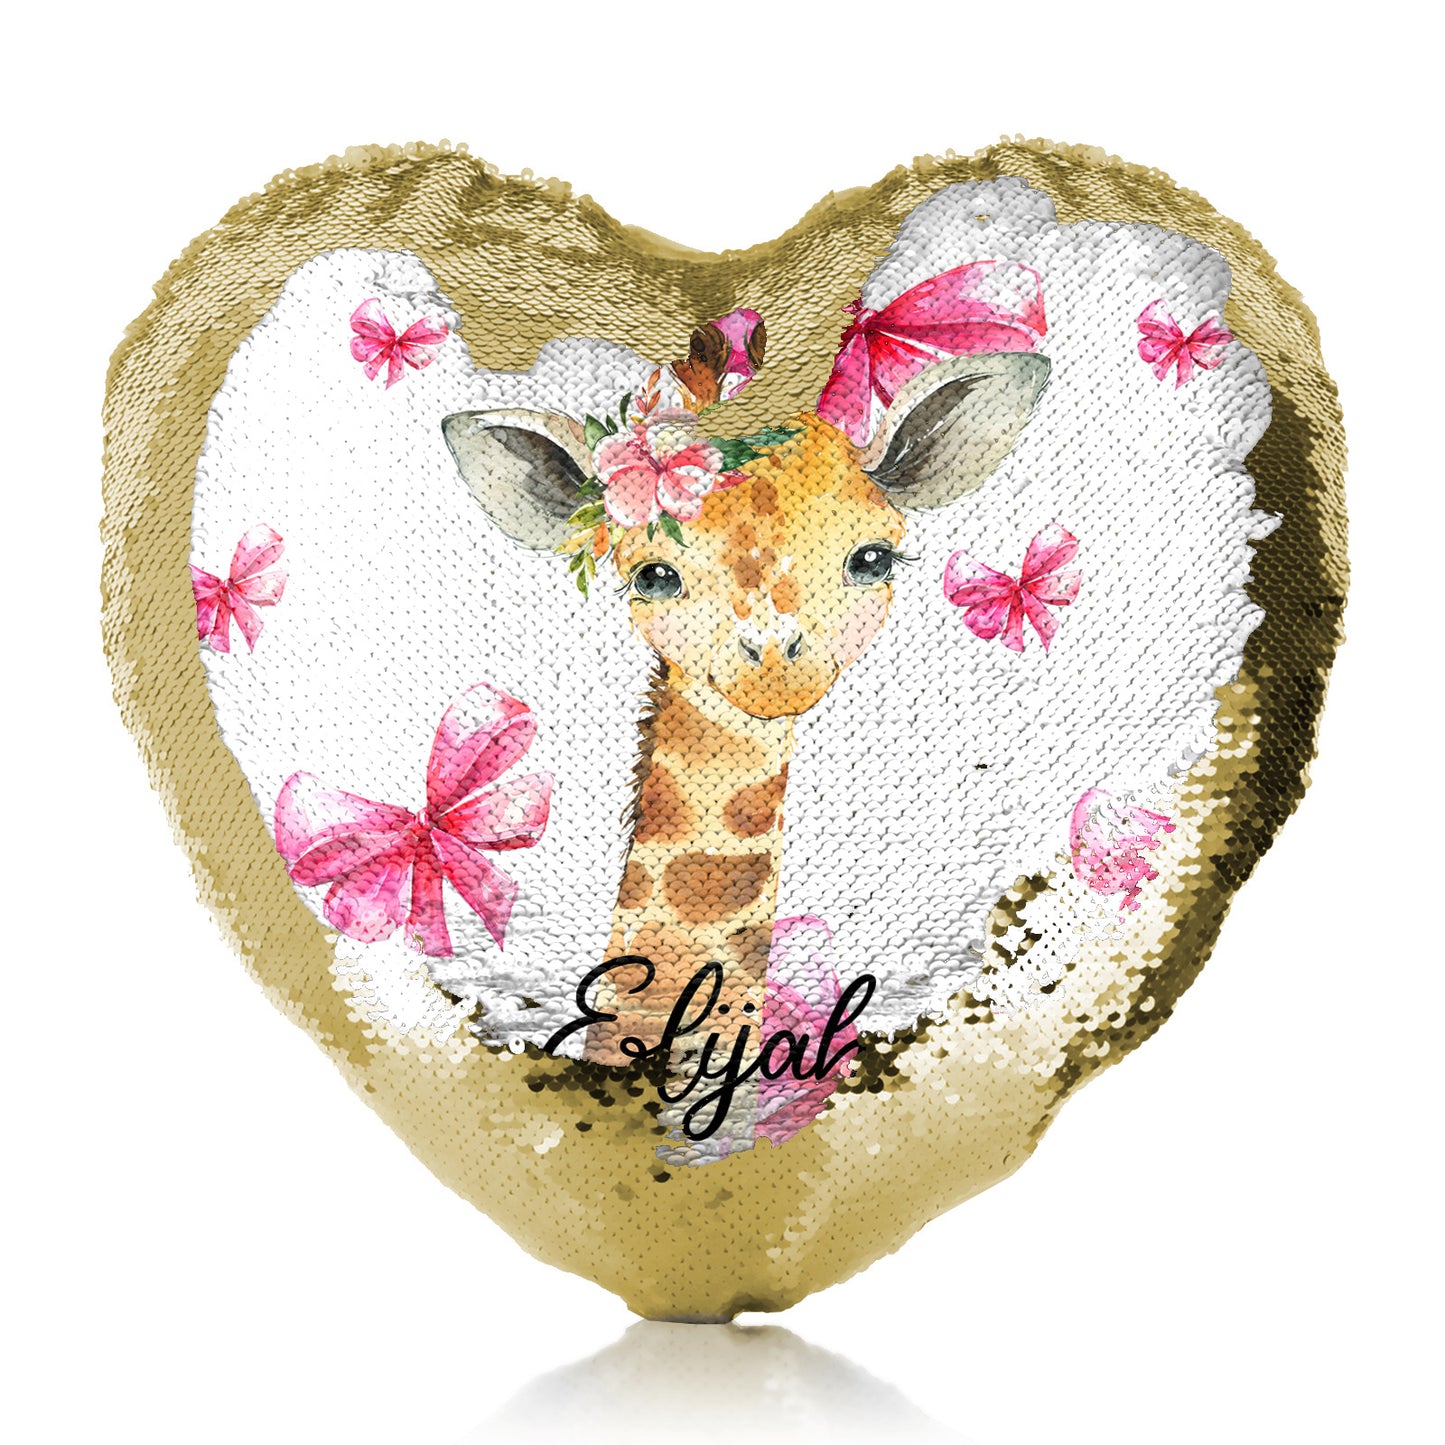 Personalised Sequin Heart Cushion with Giraffe Pink Bows and Cute Text